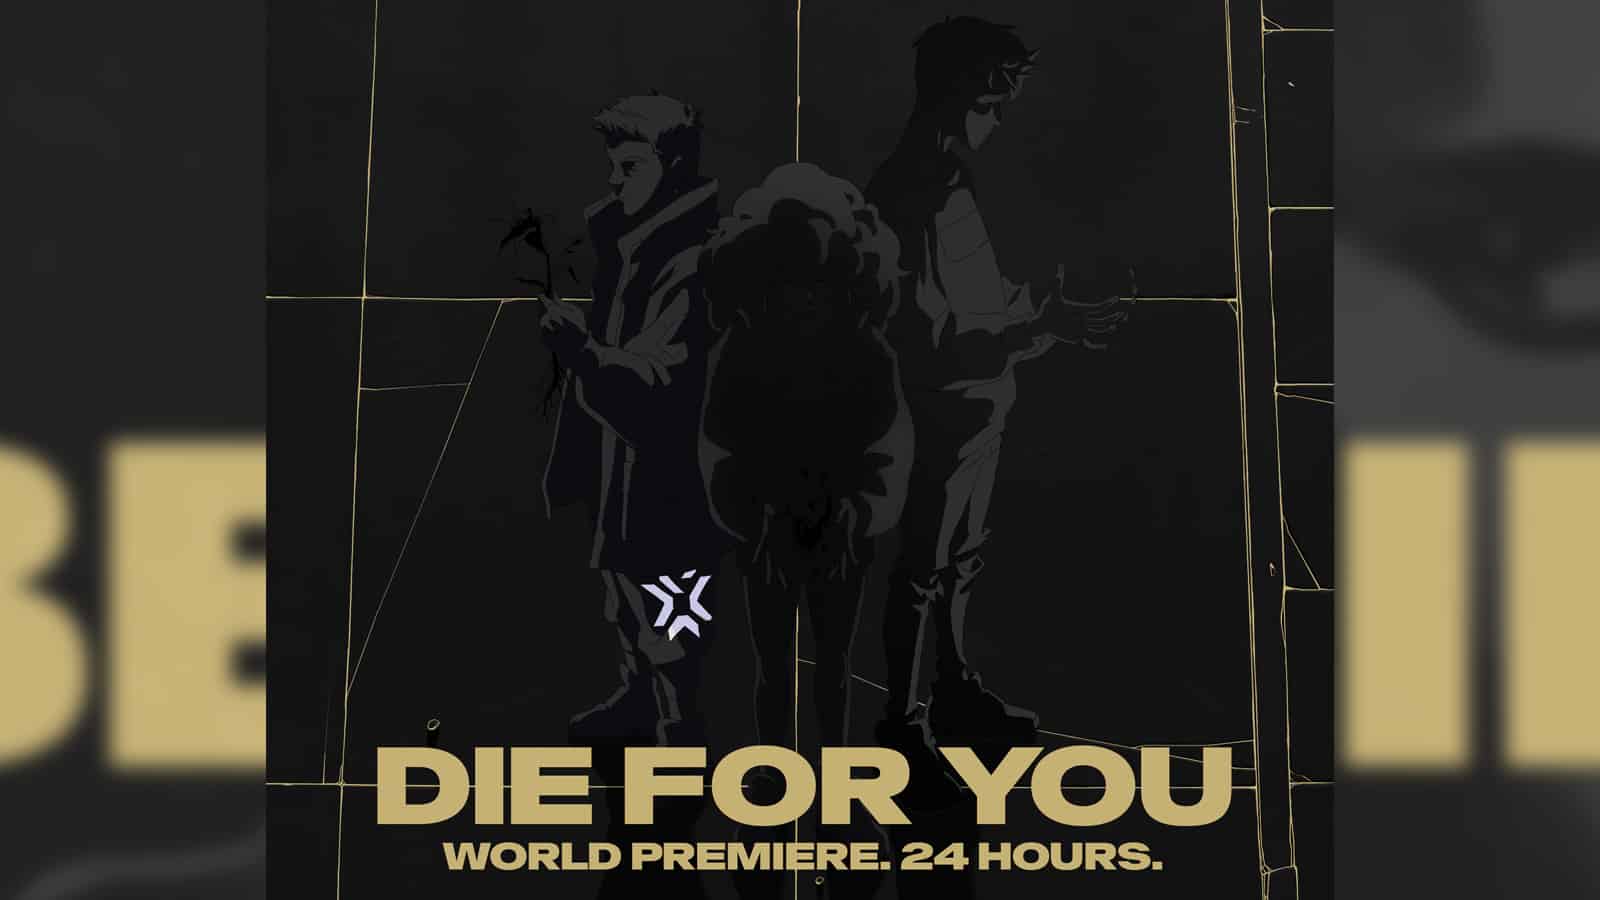 Die for You, the anthem released before the VALORANT Champions tournament was a massive hit with millions of views in just a few hours.